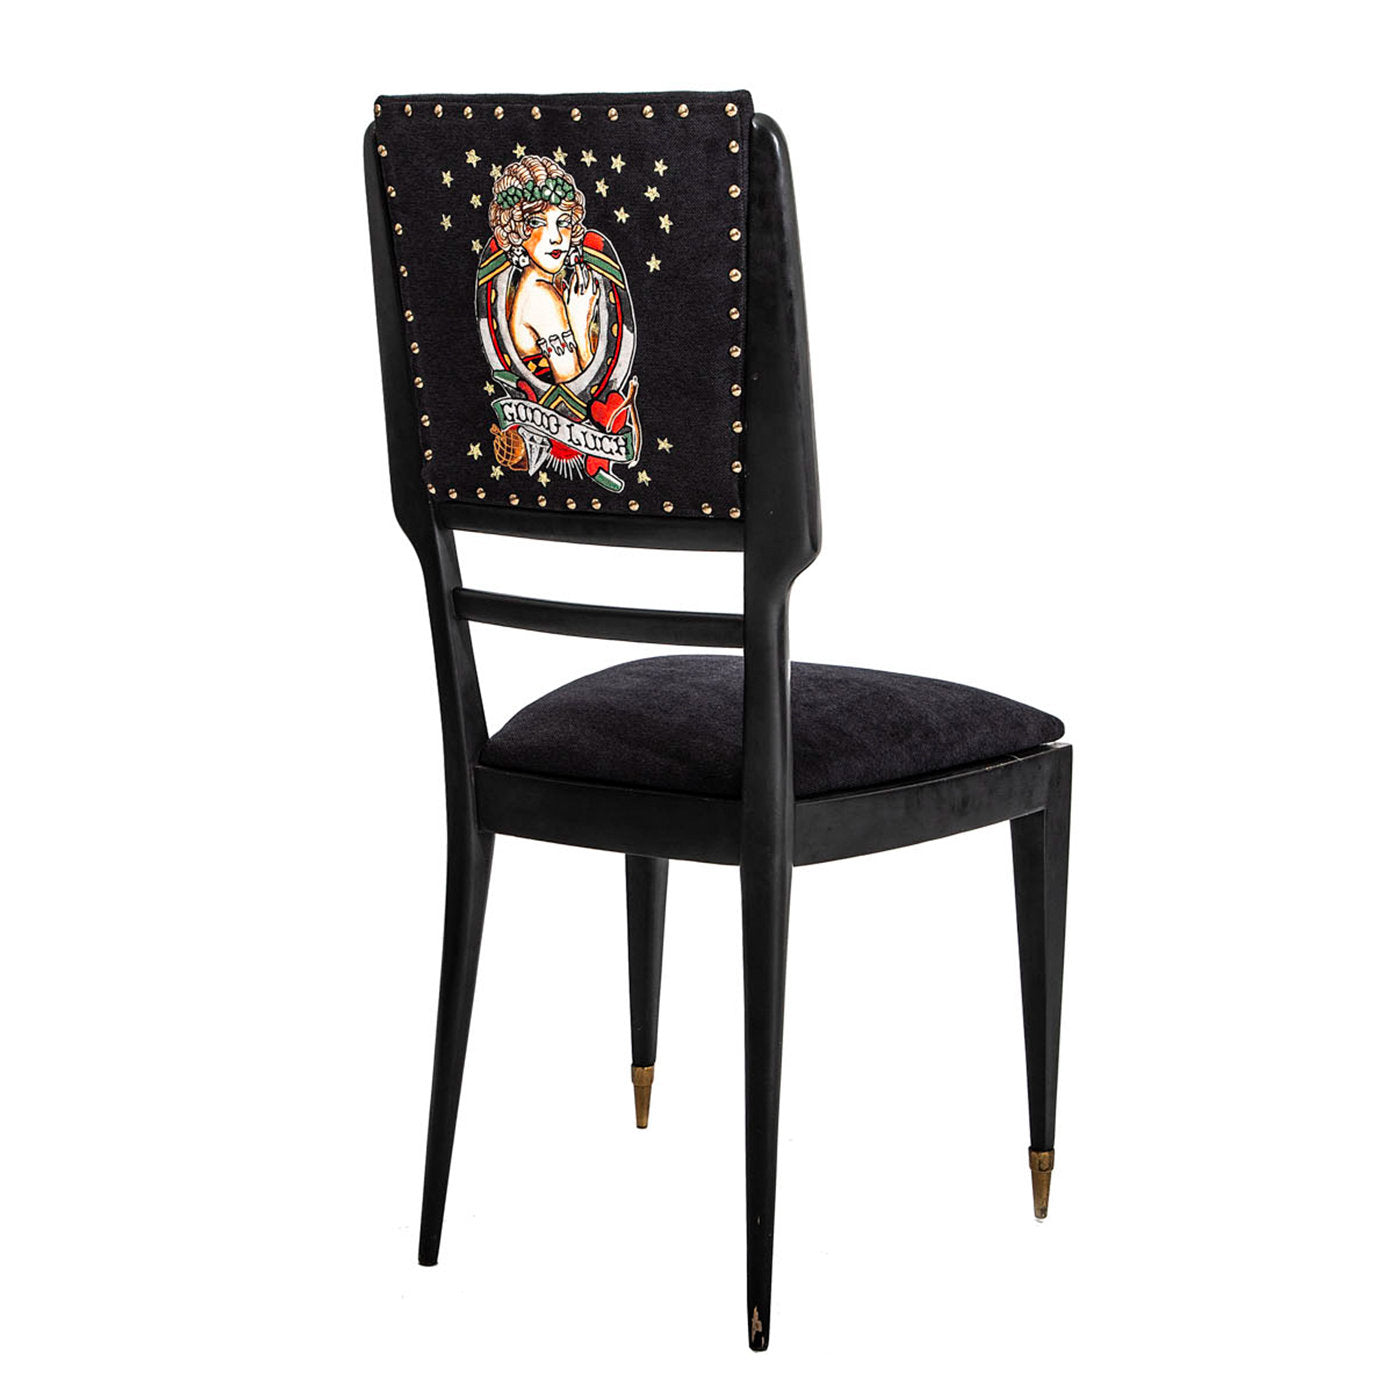 Set of 4 Old School Sailor Jerry Dining Chairs - Alternative view 2